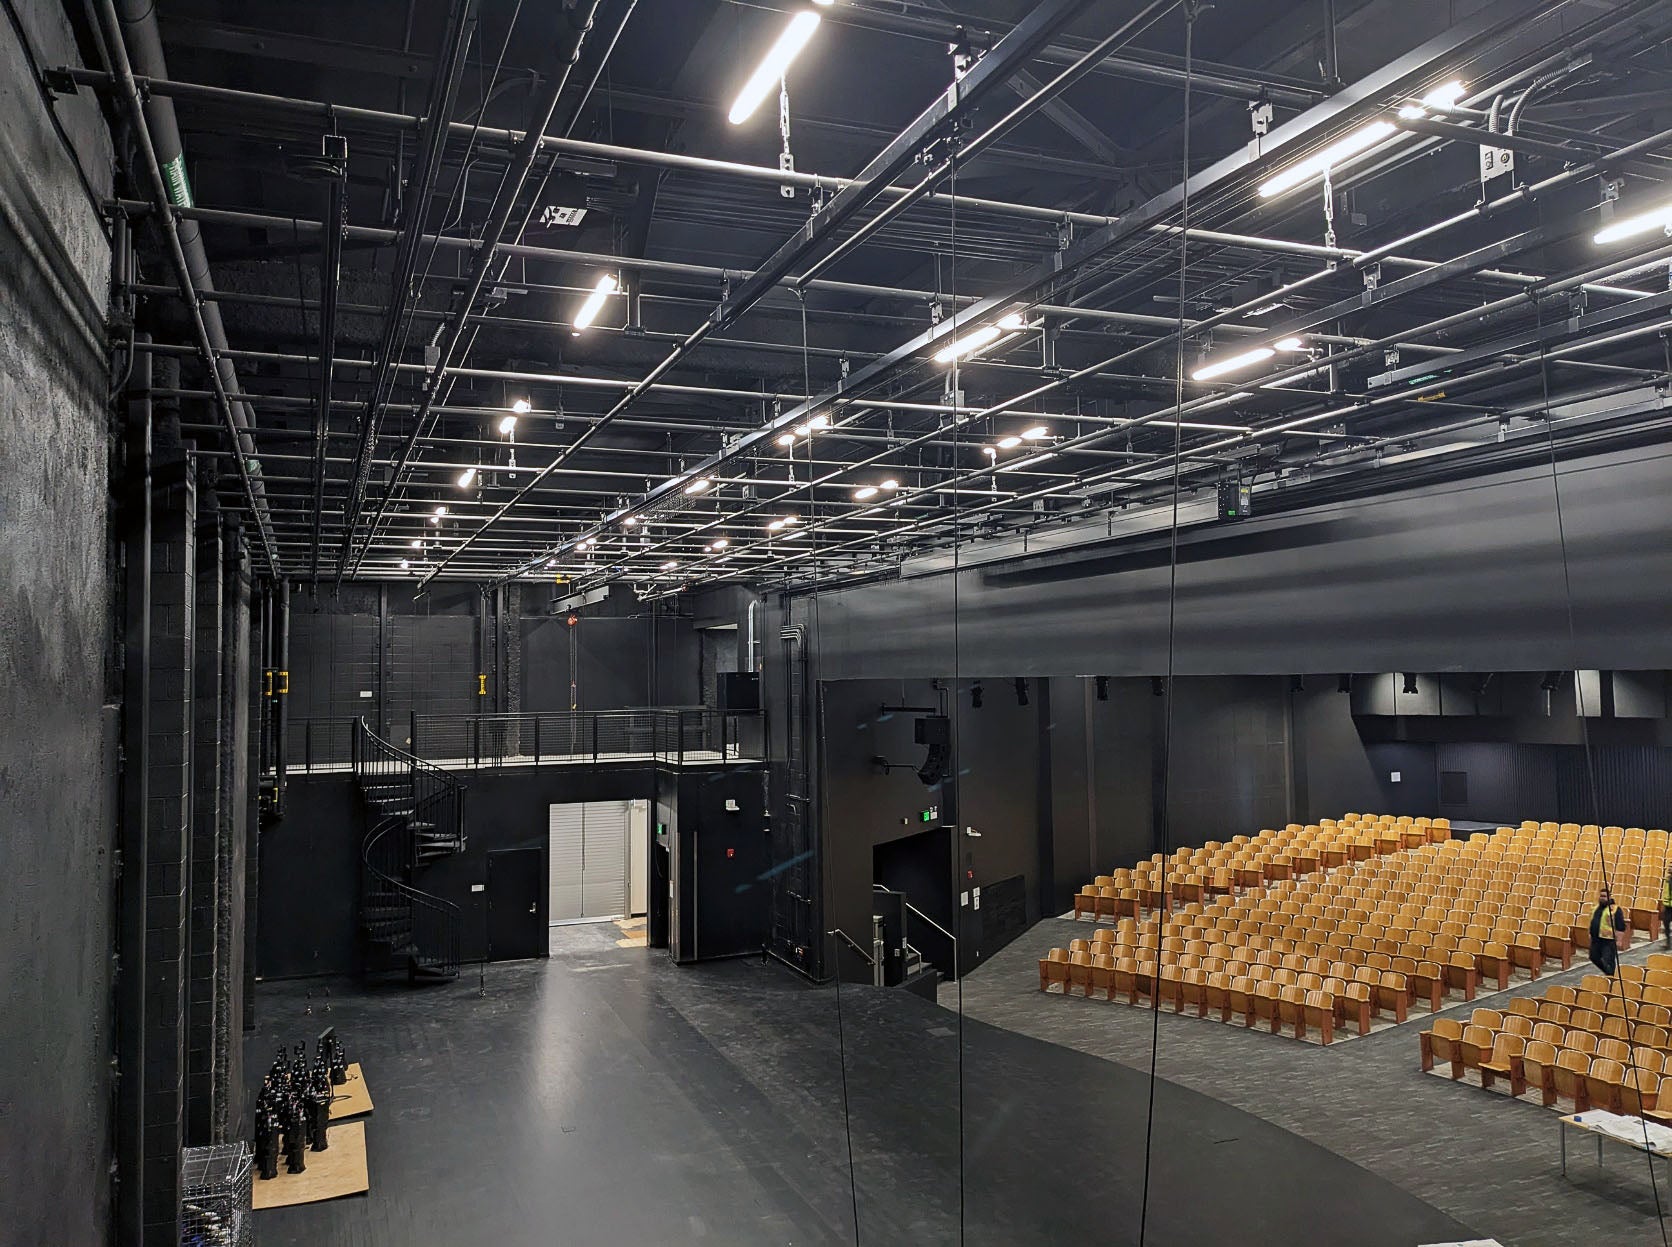 a grid of rigging hardware is shown above a stage with a view of the auditorium audience area